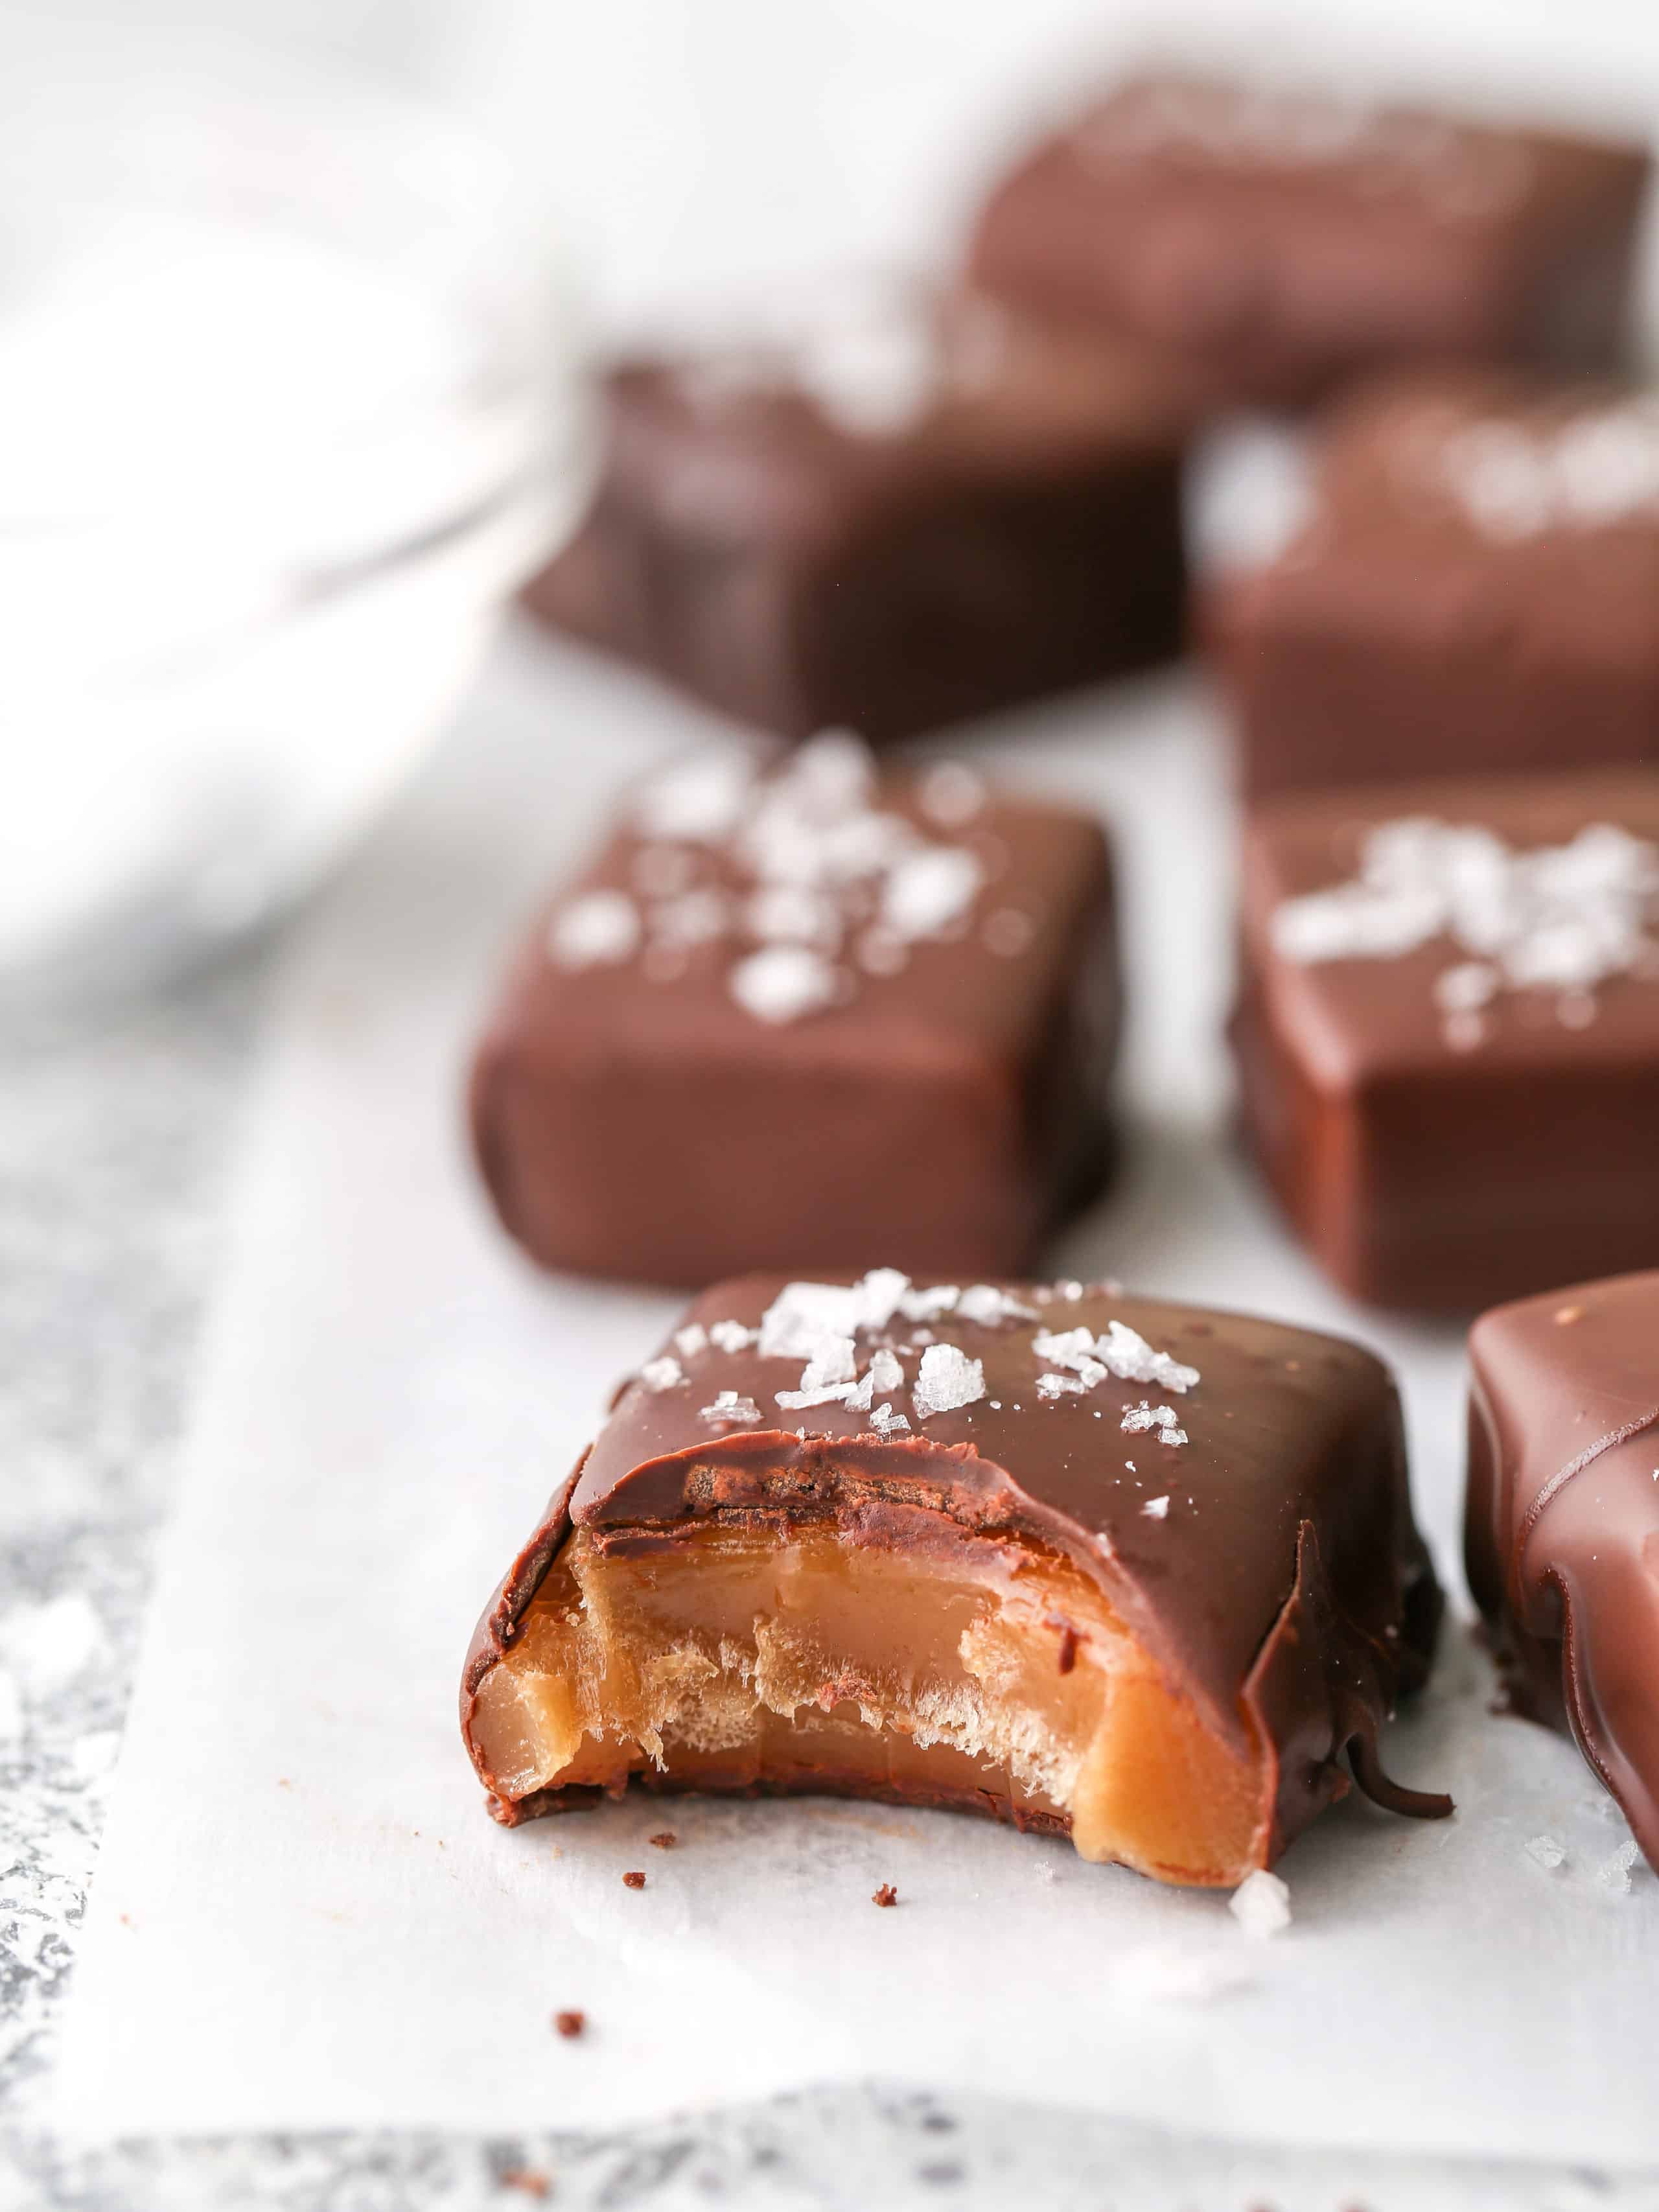 https://www.completelydelicious.com/wp-content/uploads/2019/10/chocolate-covered-caramels-6.jpg